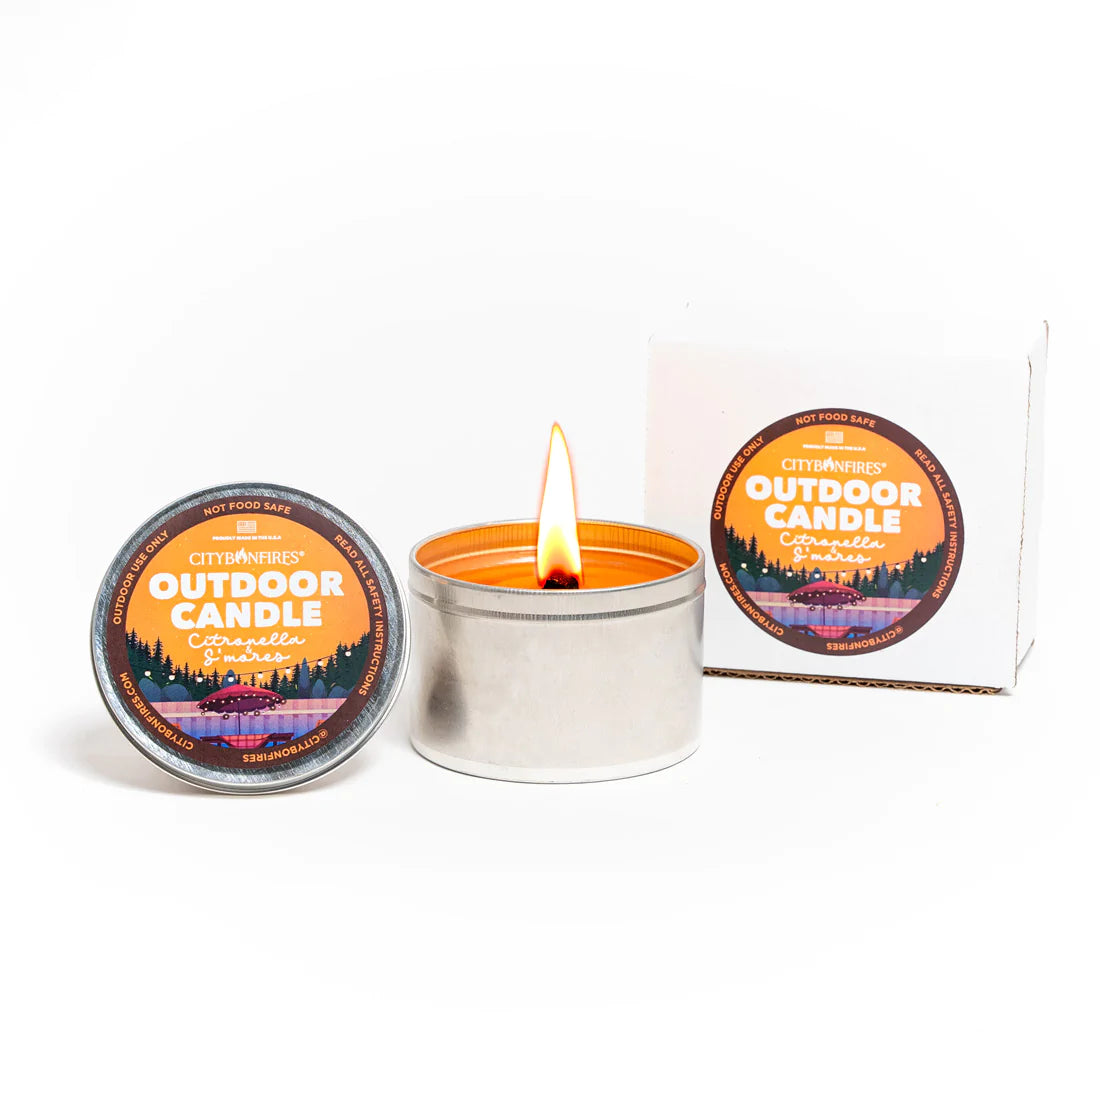 The Outdoor Citronella Candle - S'mores Scent